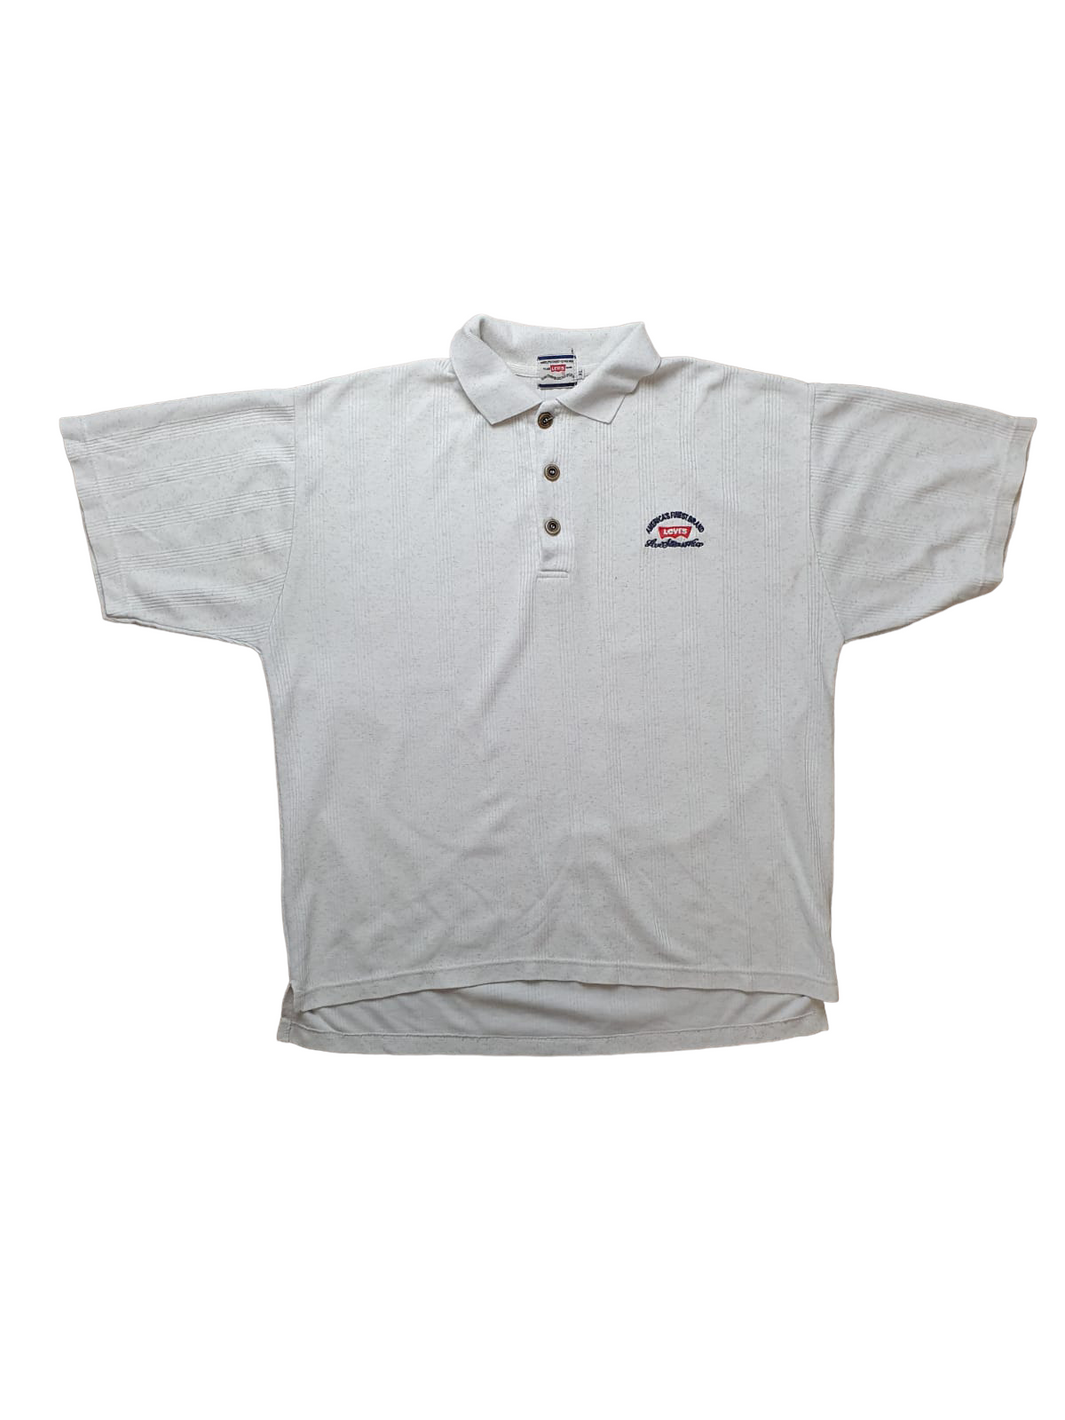 Levi’s Polo 90s embroidered